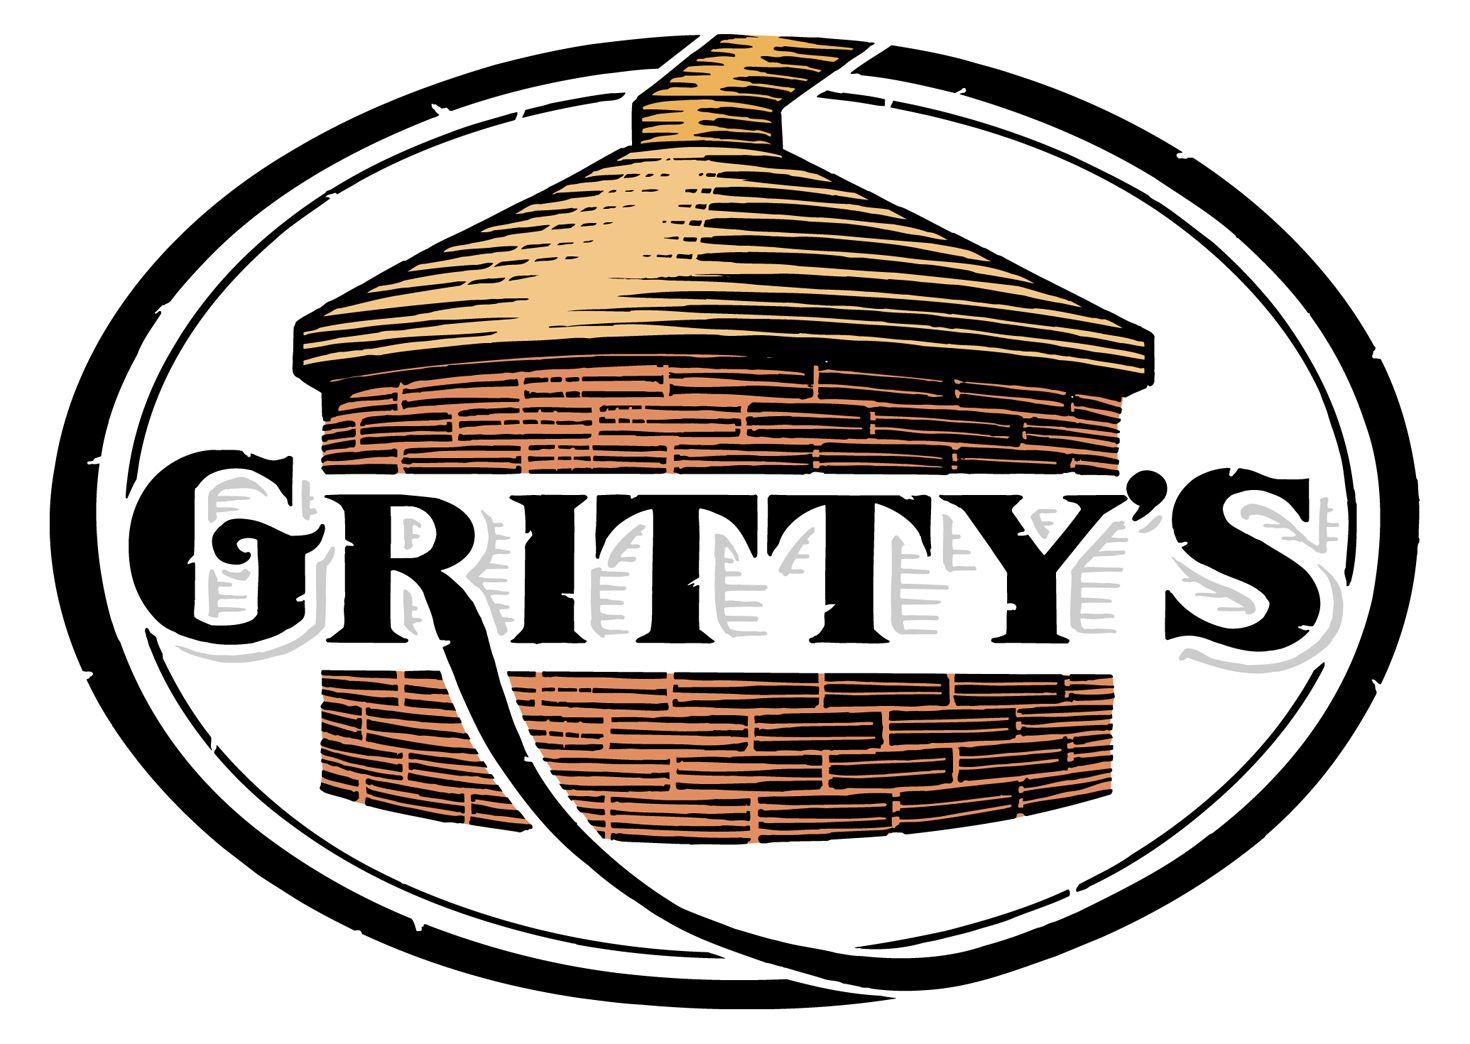 Gritty's Logo - Maine's Award Winning Brew Pub And Brewery